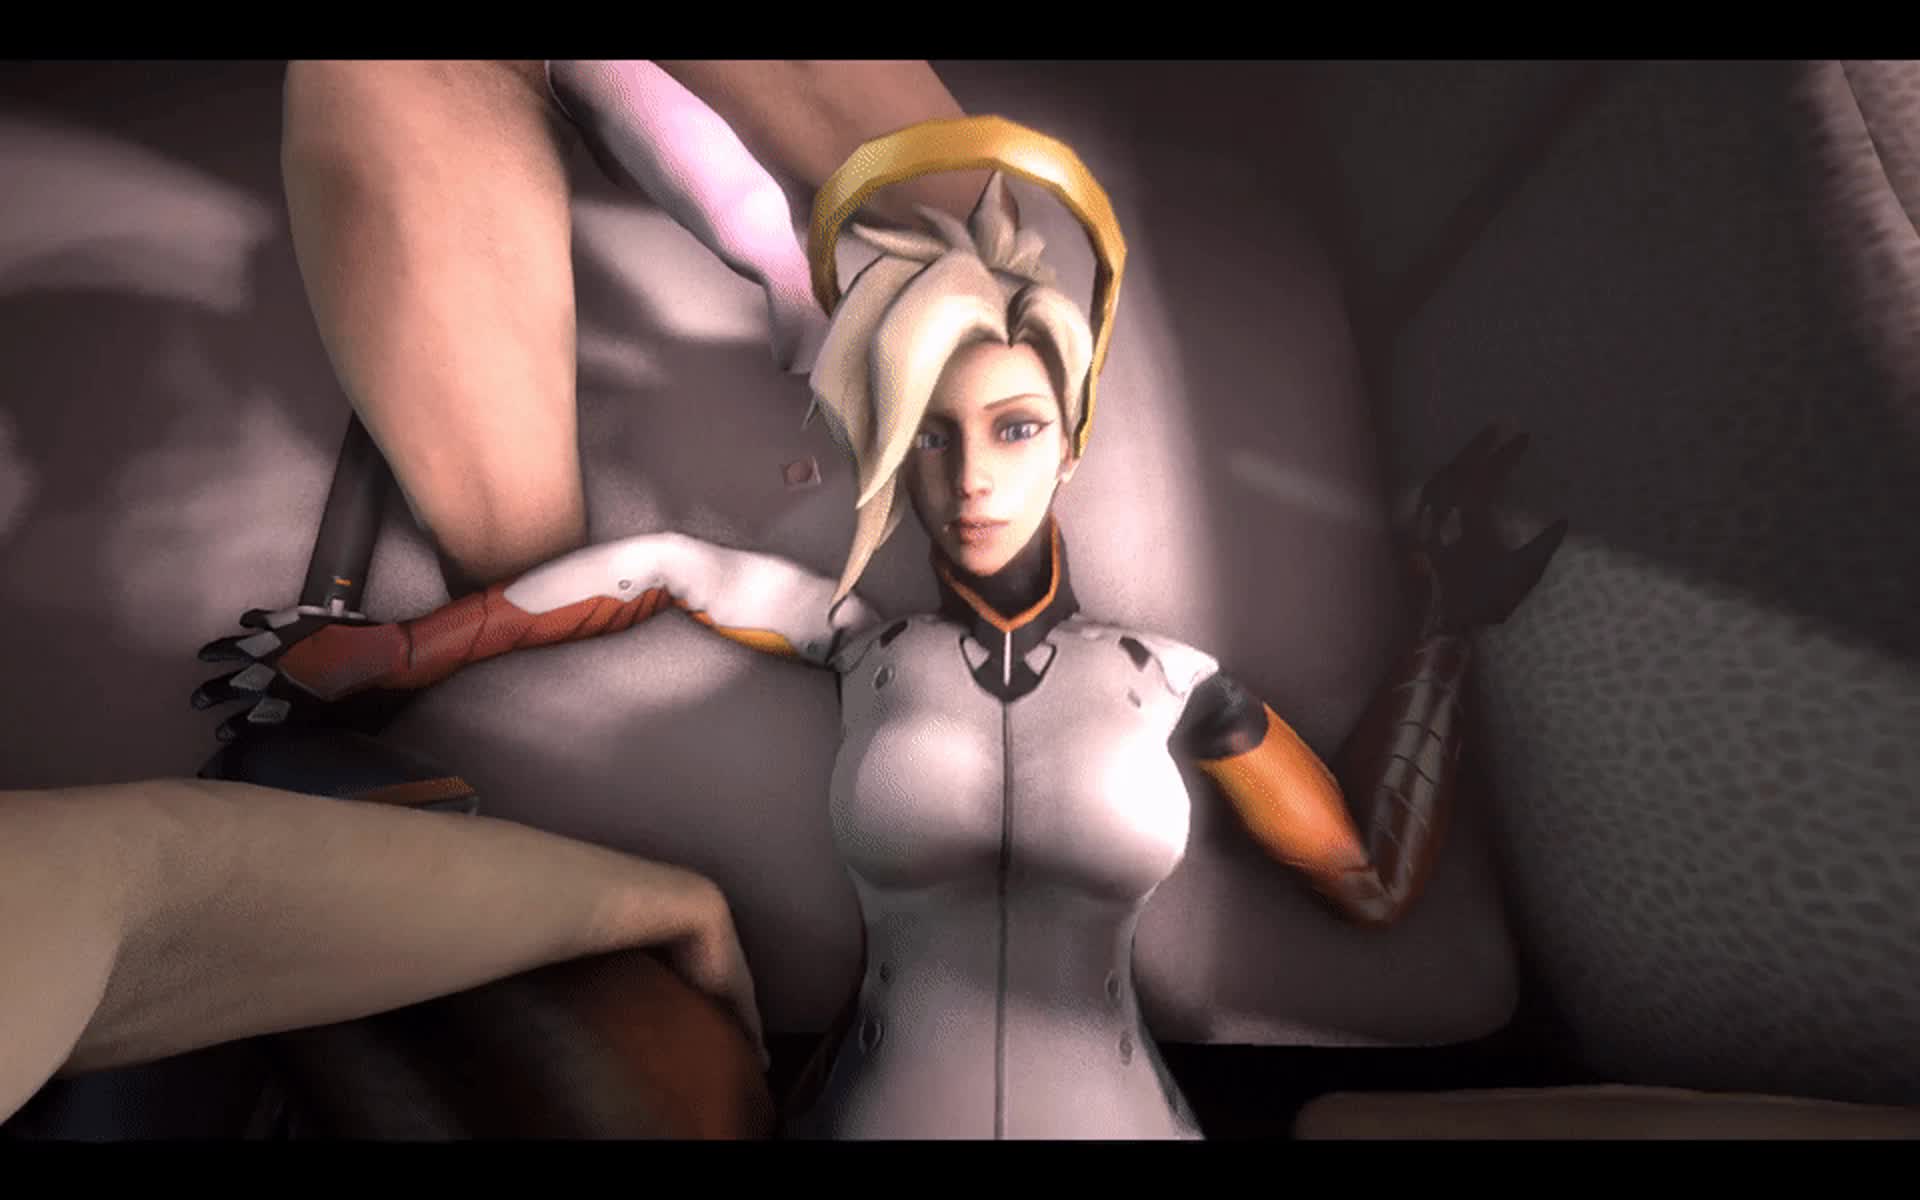 Mercy from overwatch gets creampied felicia